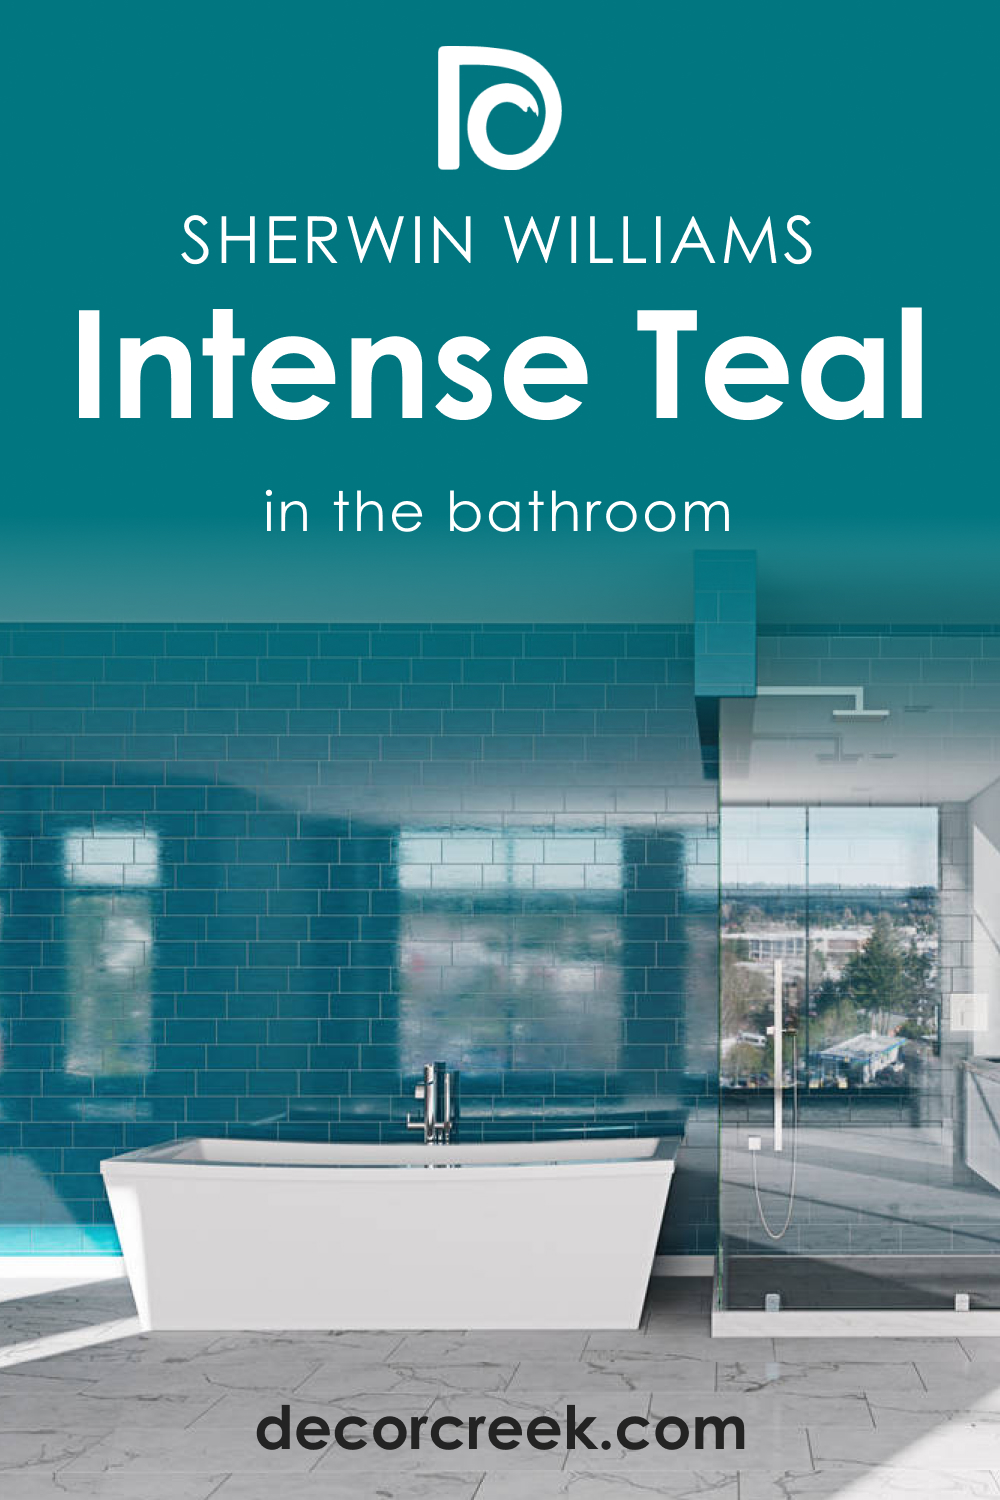 How to Use SW 6943 Intense Teal in the Bathroom?